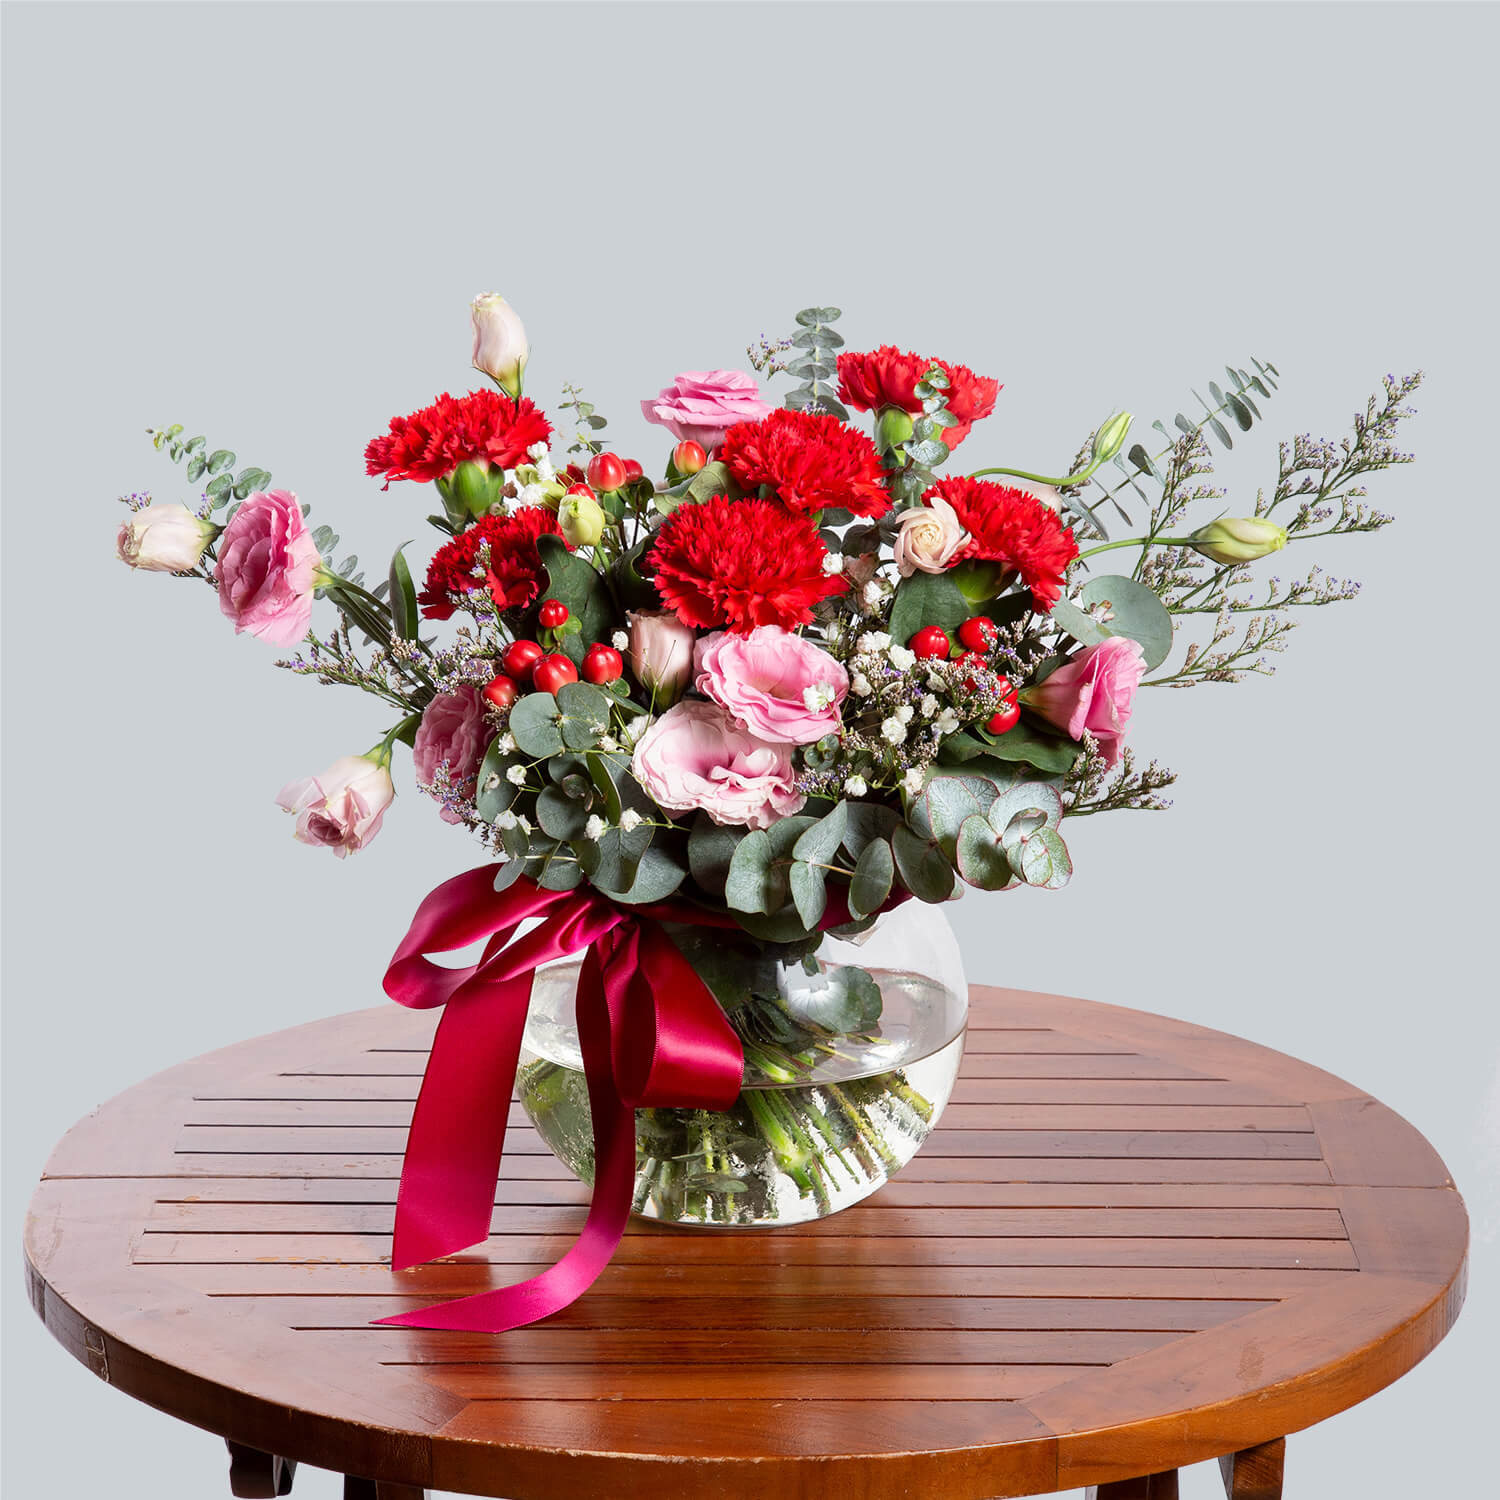 A Touch of Nature: Incorporating Table Flowers into Your Home Décor